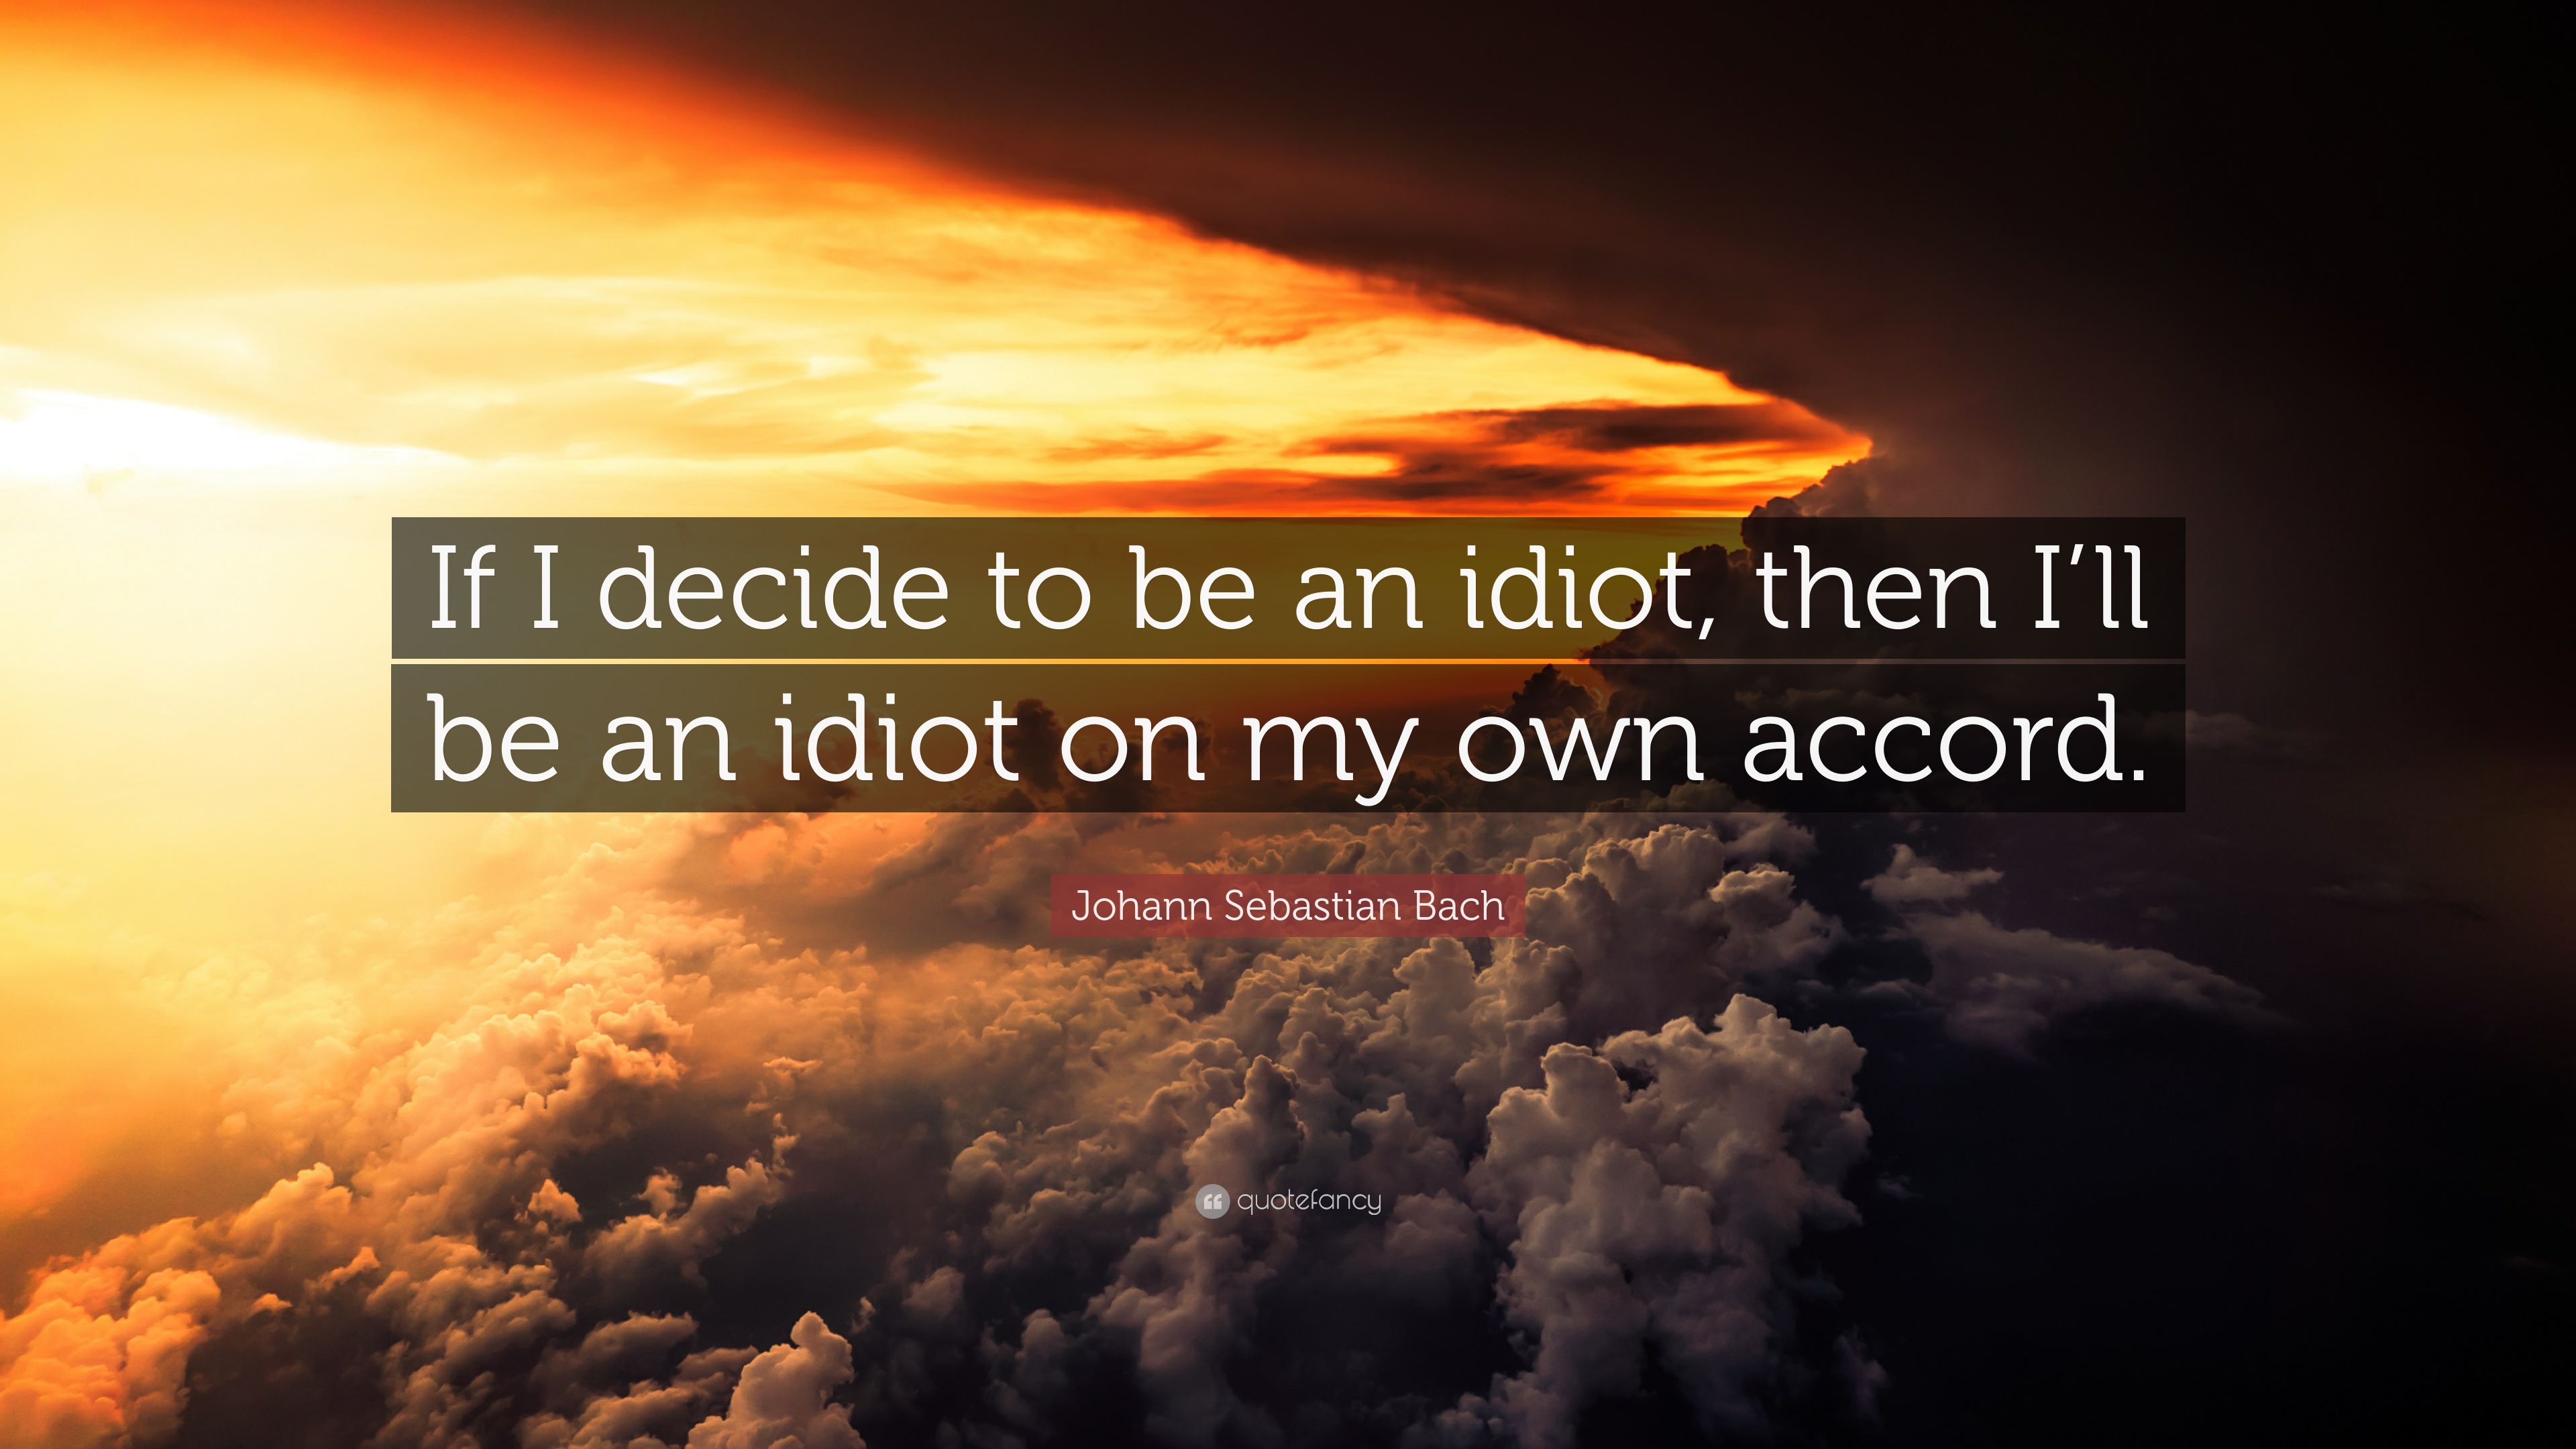 Johann Sebastian Bach Quote: “If I decide to be an idiot, then I'll